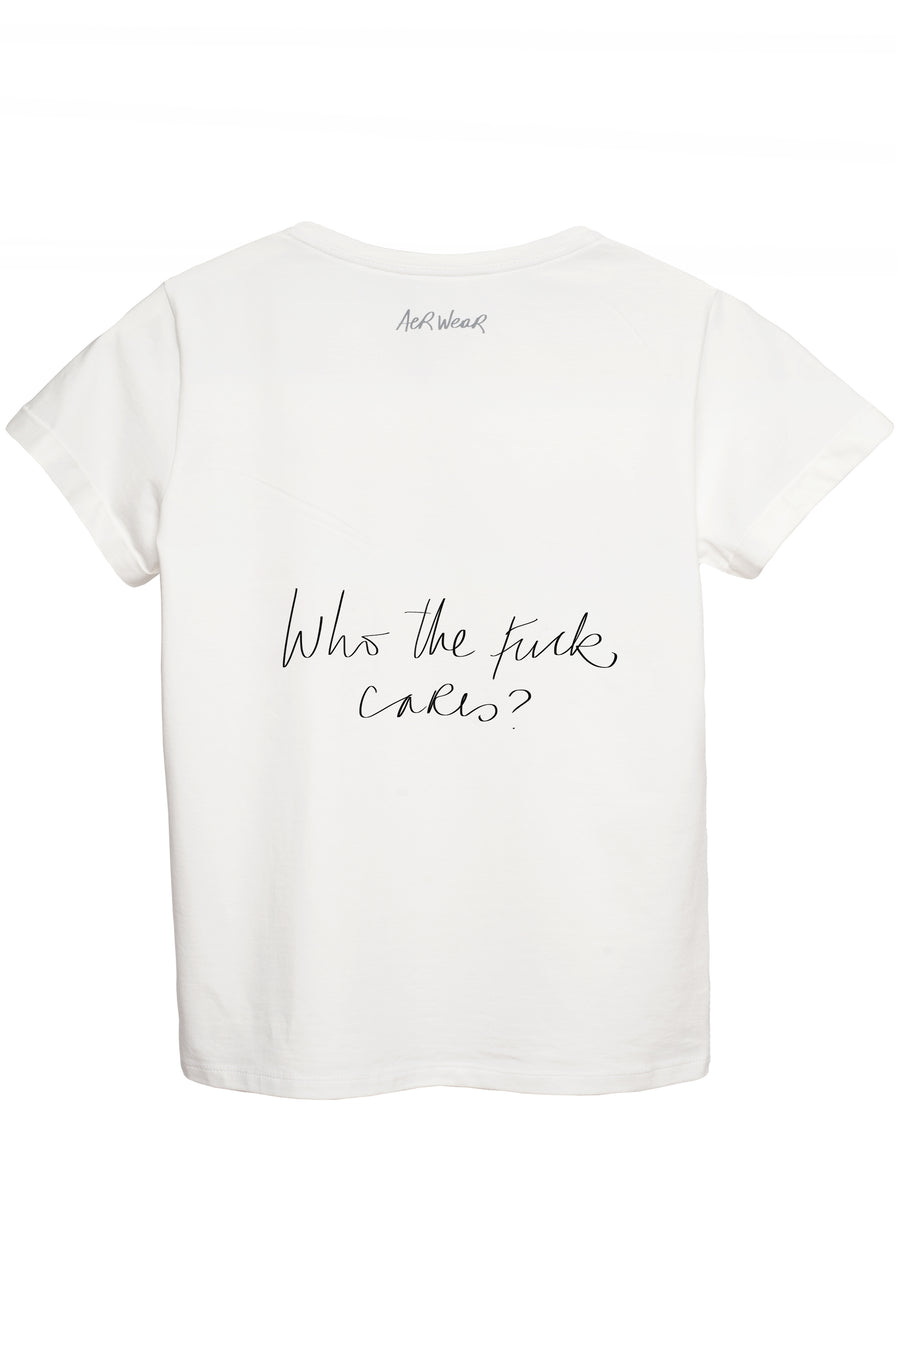 WHO THE FUCK CARES Tshirt